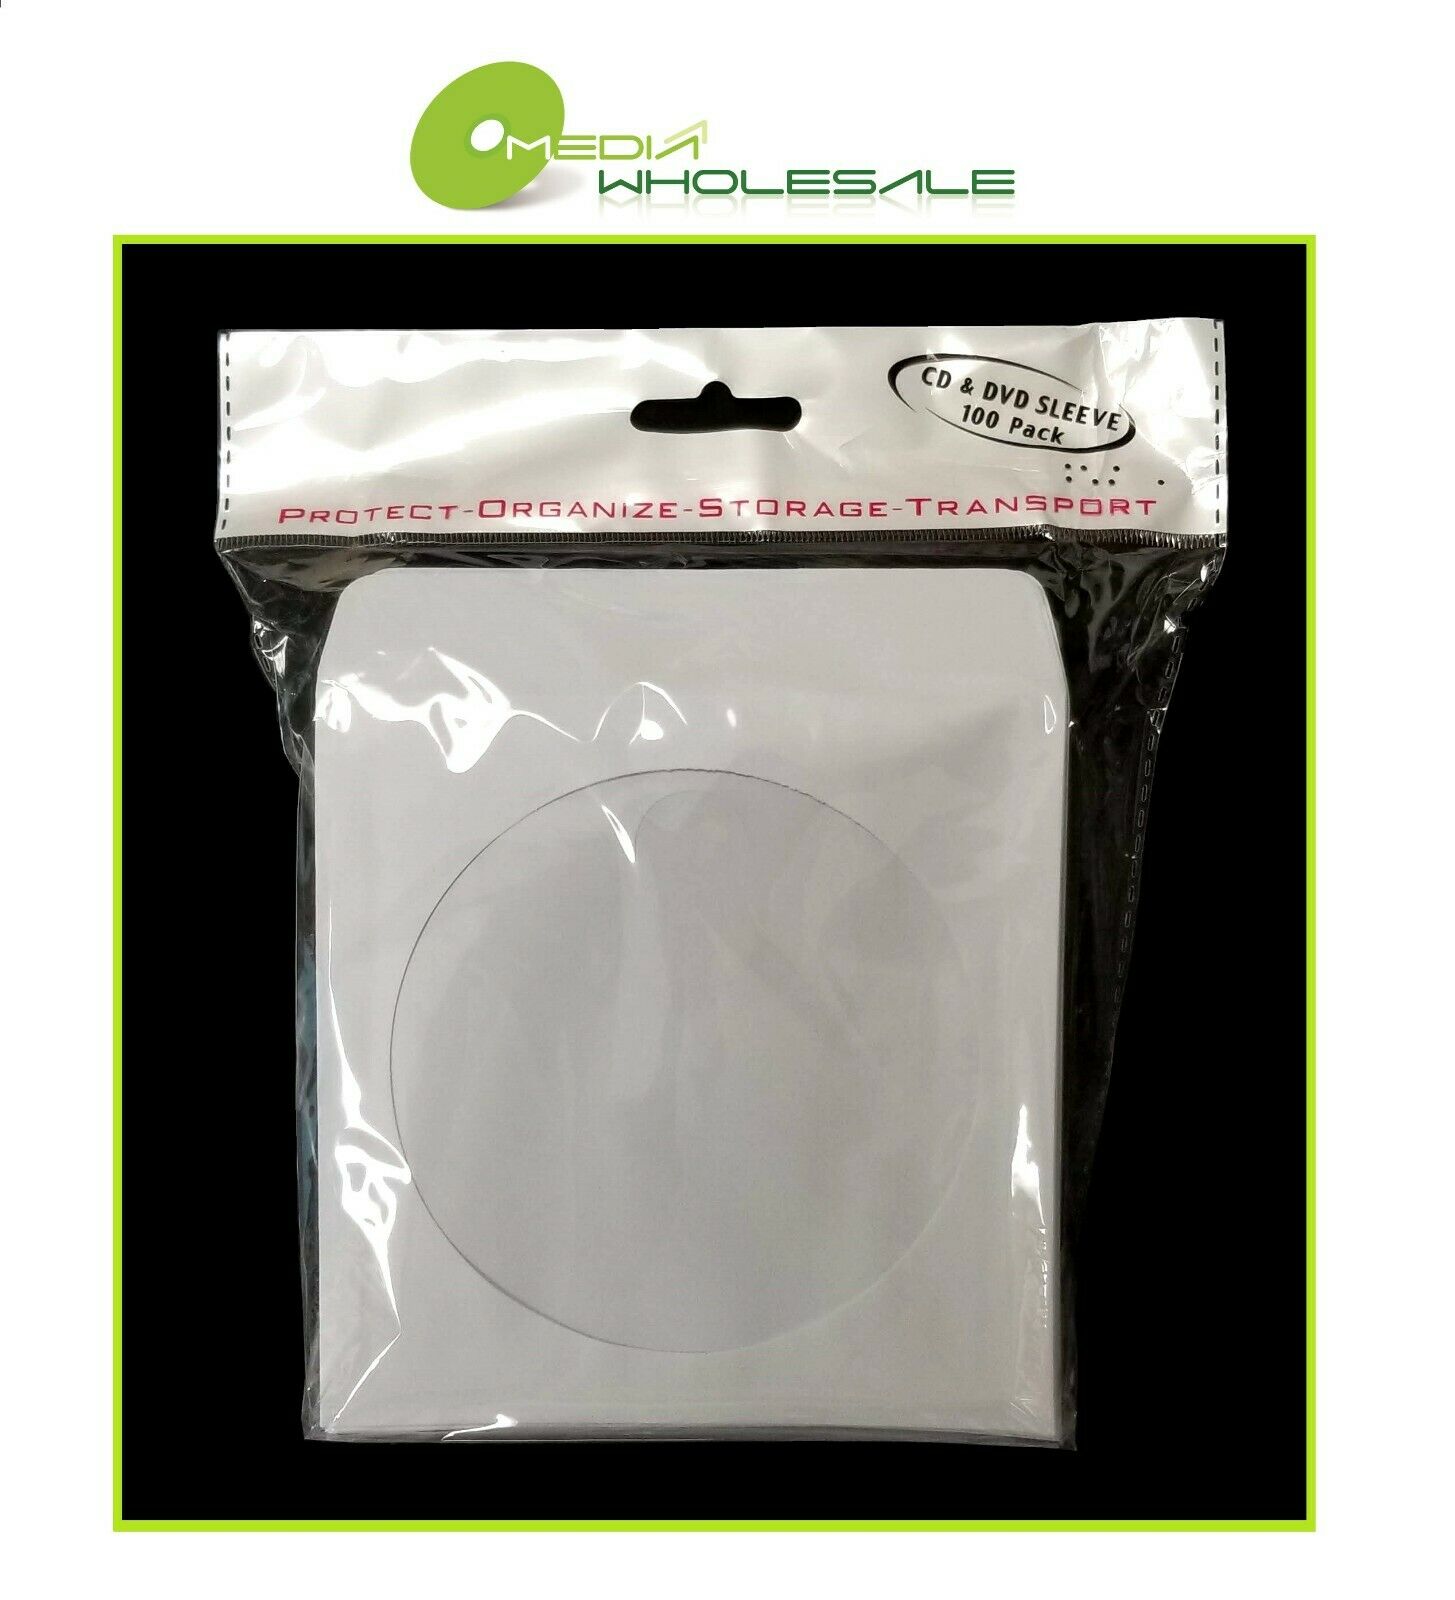 1000 Premium Quality Cd Dvd White Paper Sleeve With Window & Flap Envelope 100gr